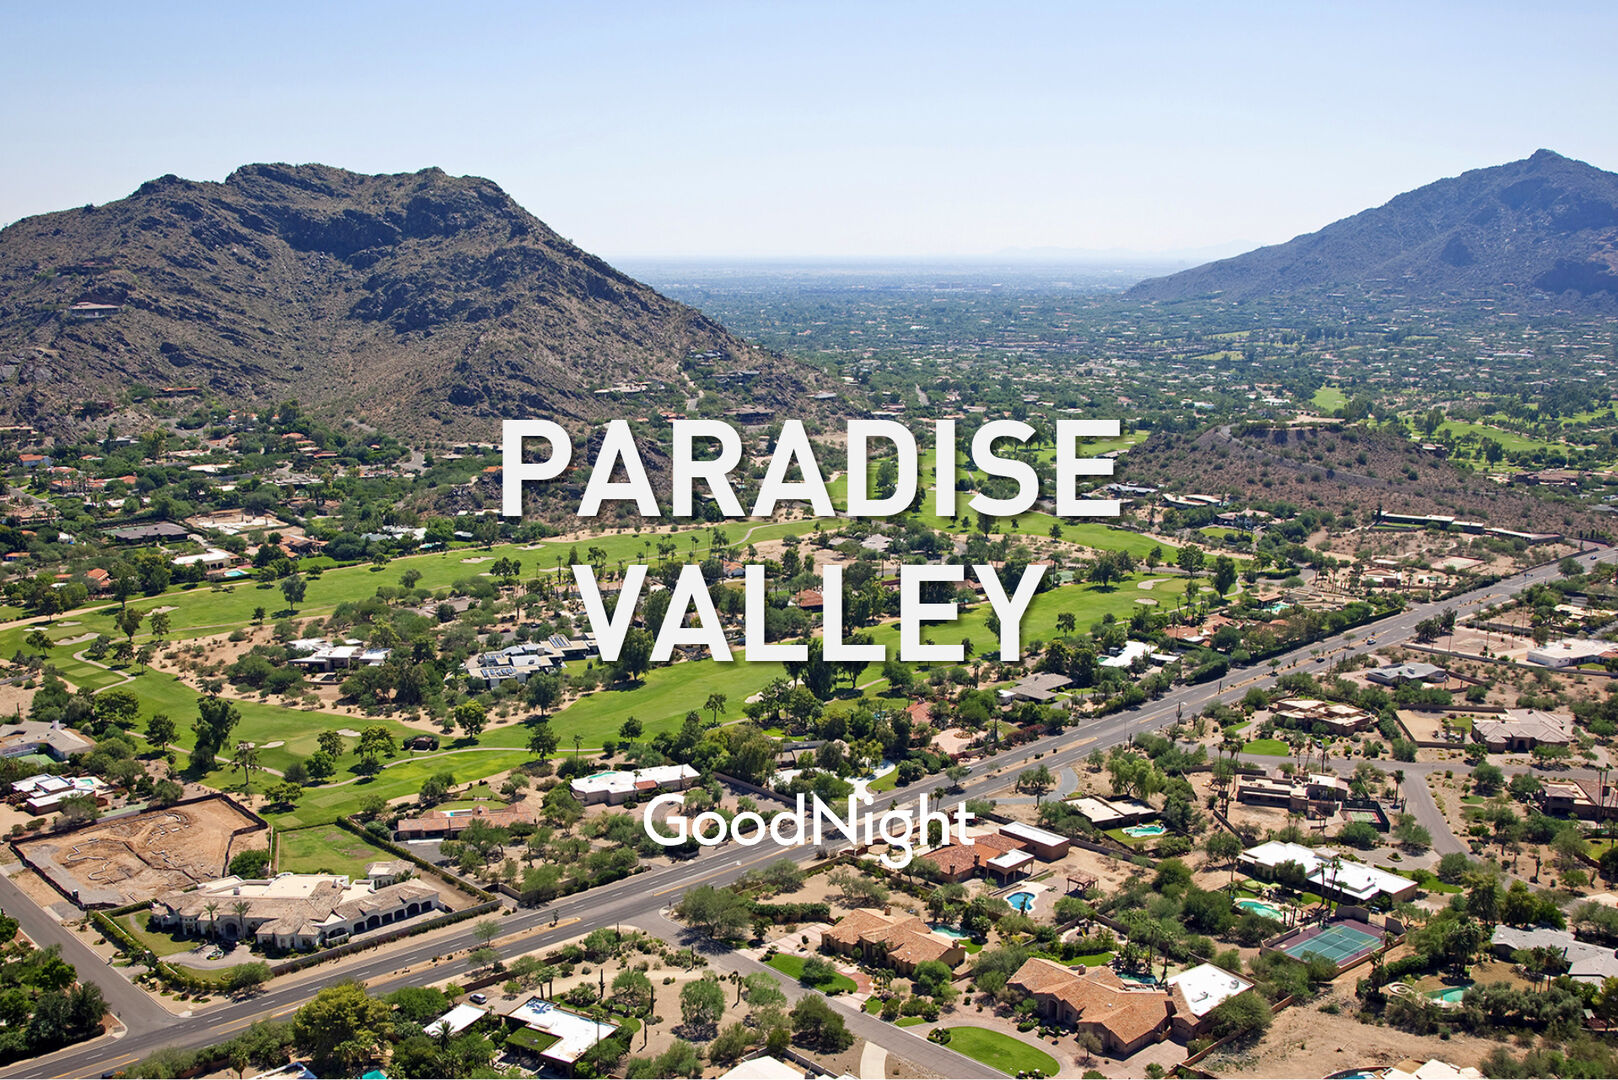 25 minutes to Paradise Valley